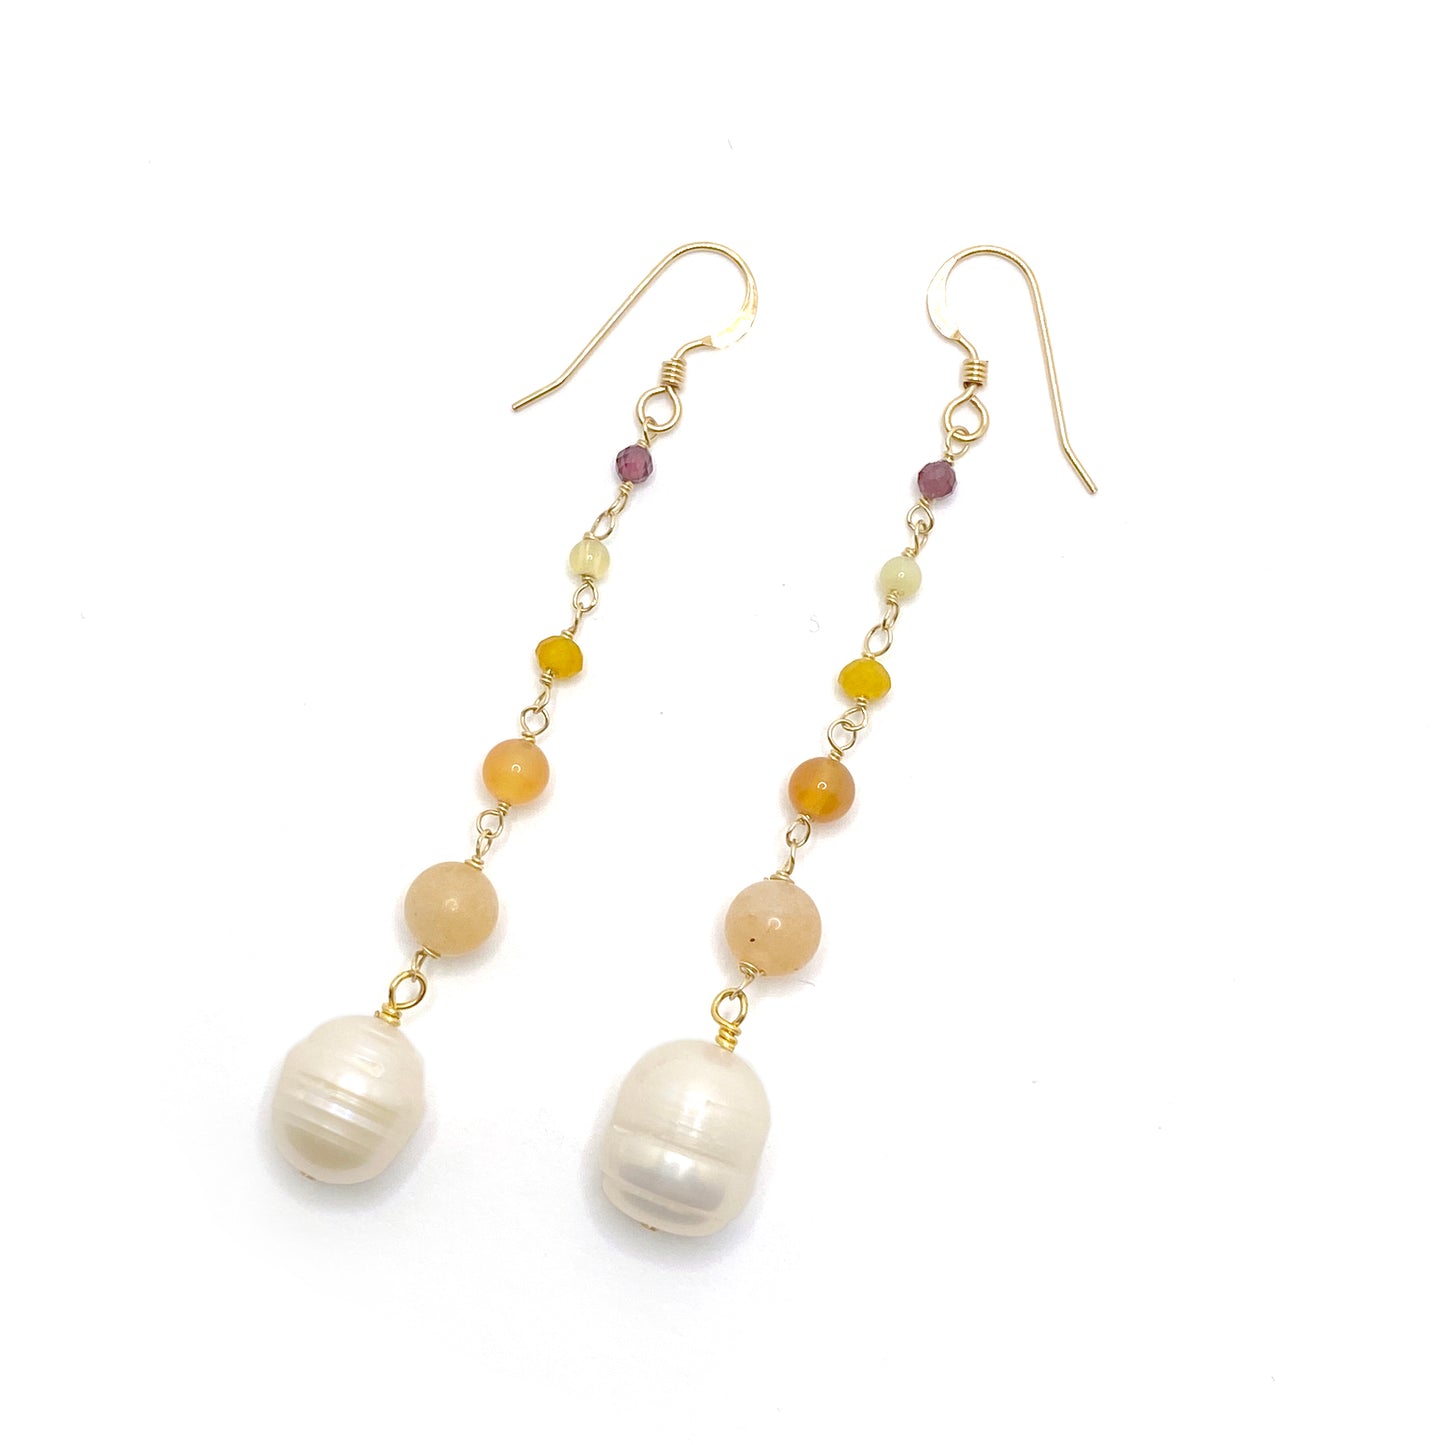 14k gold-filled hook earrings in the hues of a warm sunset. Beads connected by delicate wire wraps and increasing in size as they go down. Starting at the top with a tiny faceted garnet, a round yellow opal, a faceted dyed yellow quartz, a round orange agate, a round pale orange carnelian, and an oblong freshwater pearl.